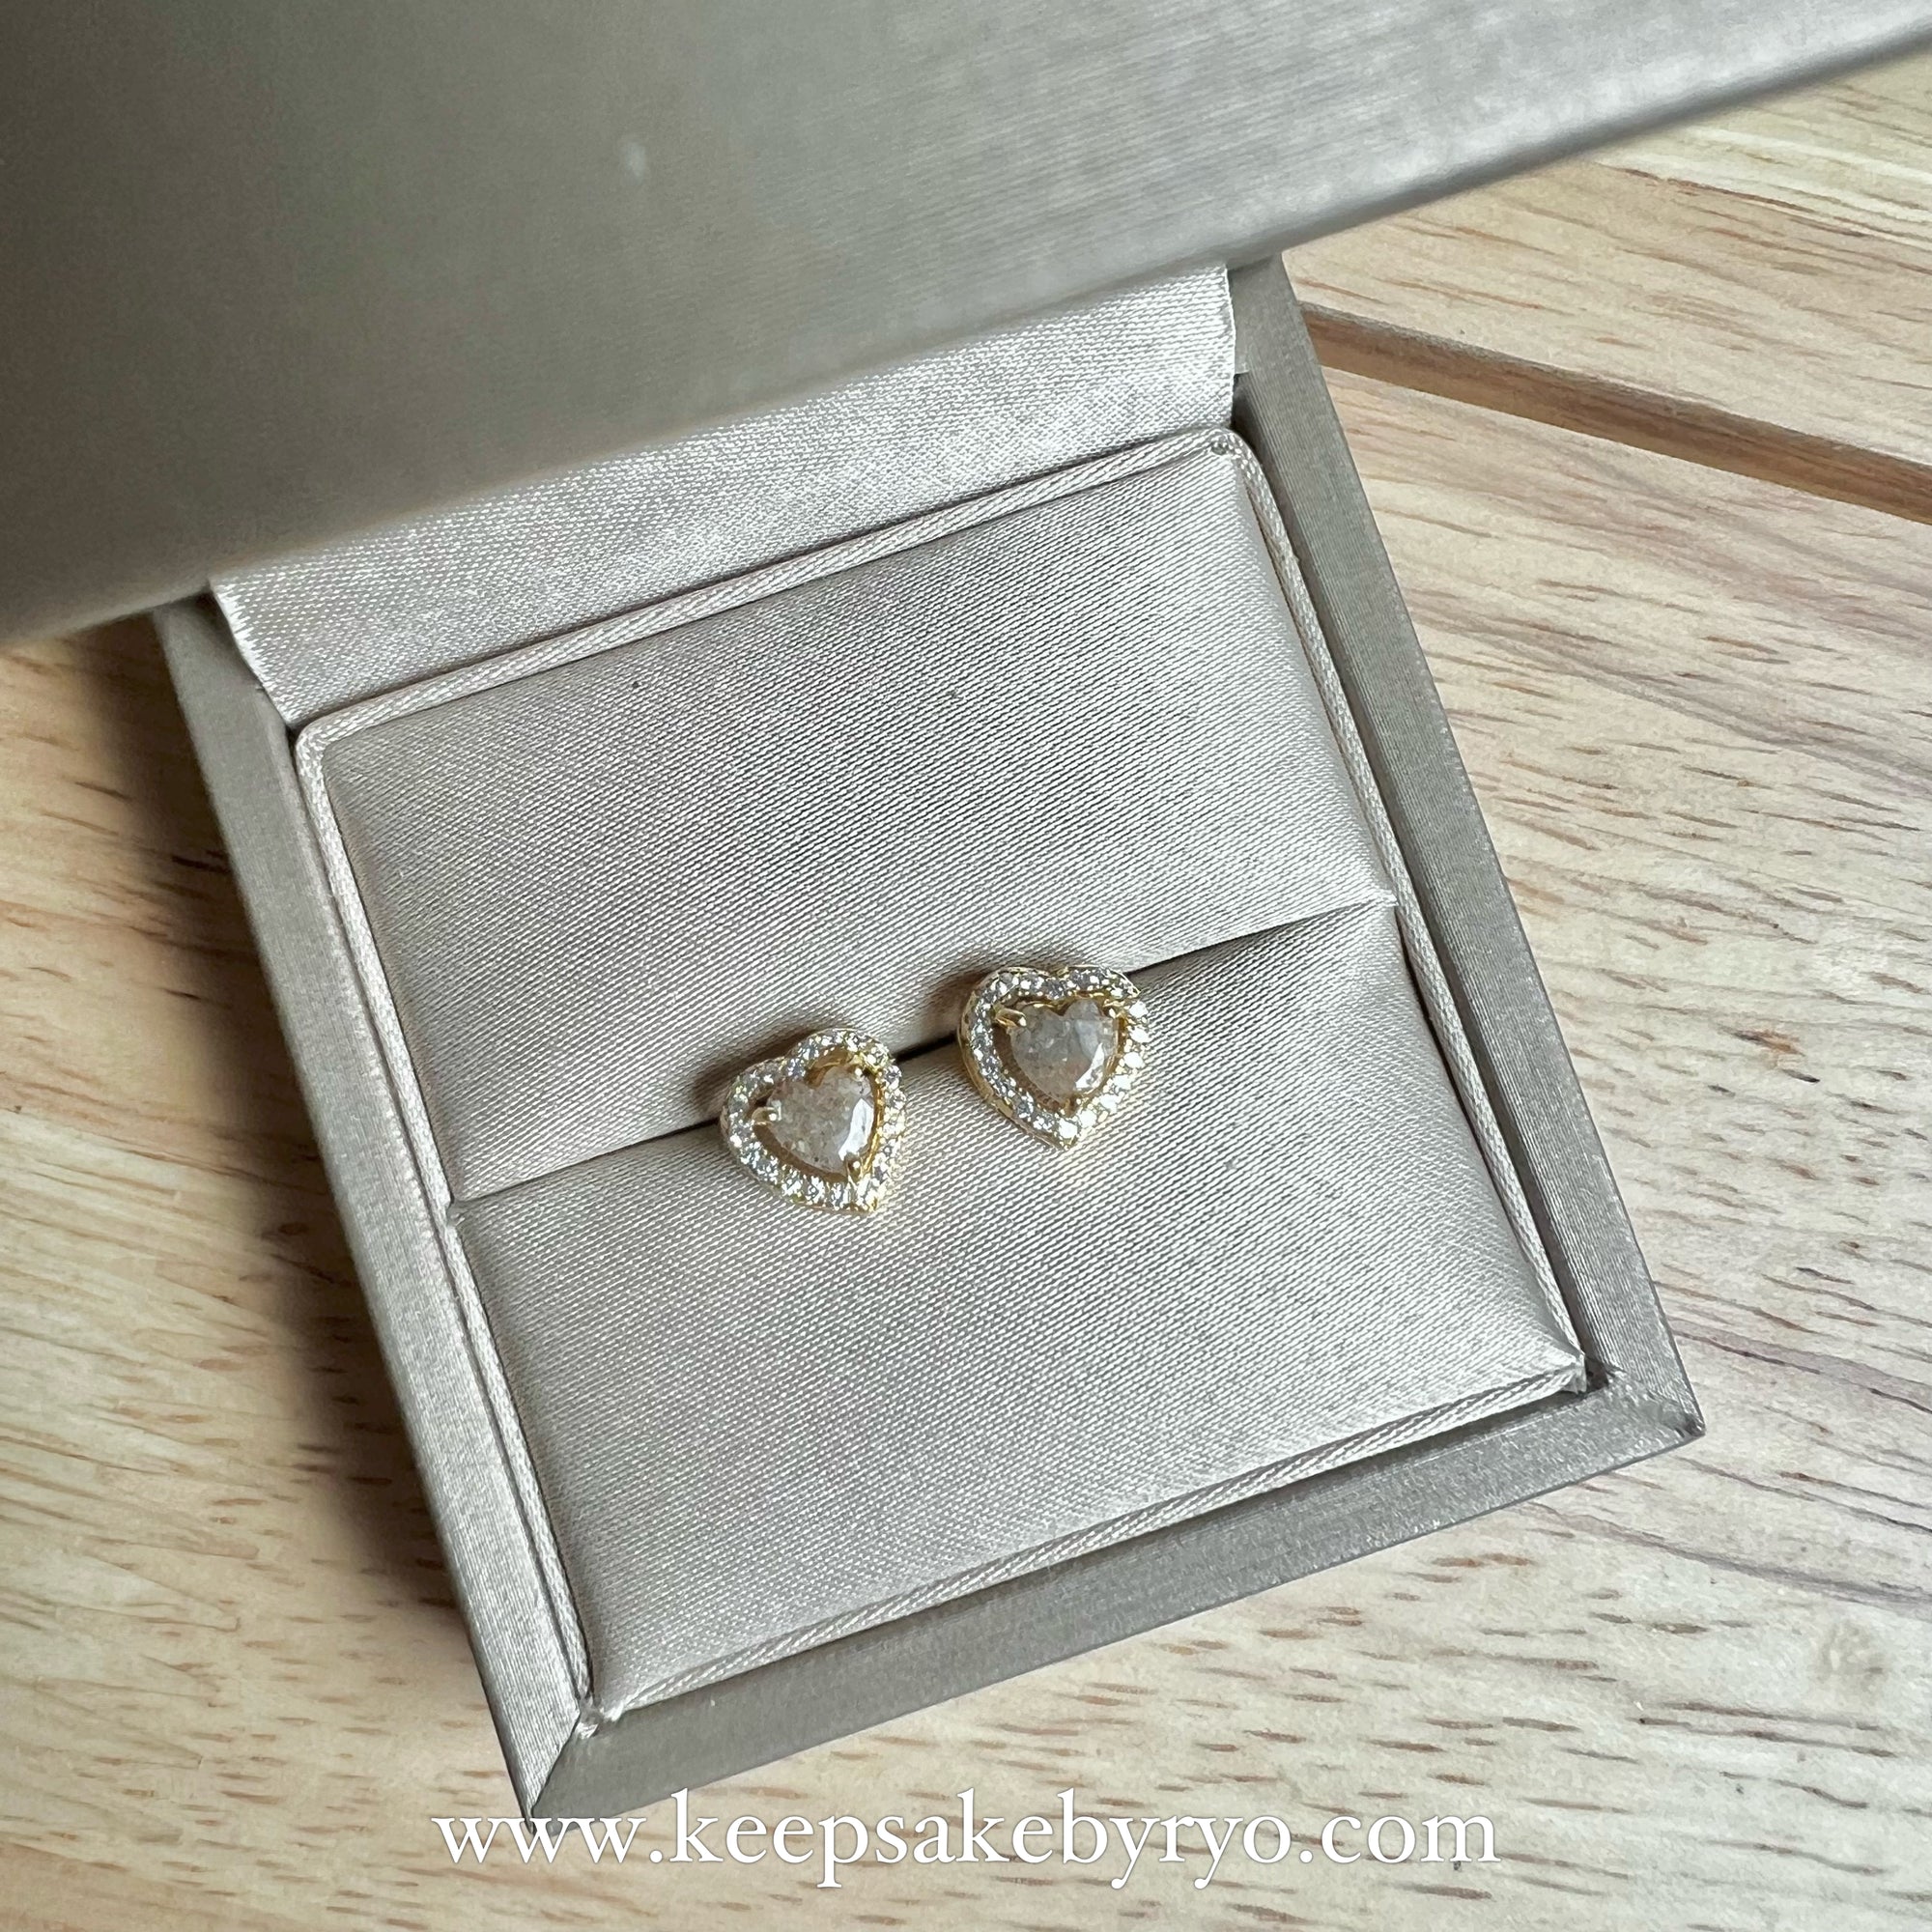 ASHES 925 SOLITAIRE: GEMMA STUD EARRINGS WITH HEART INCLUSION STONES